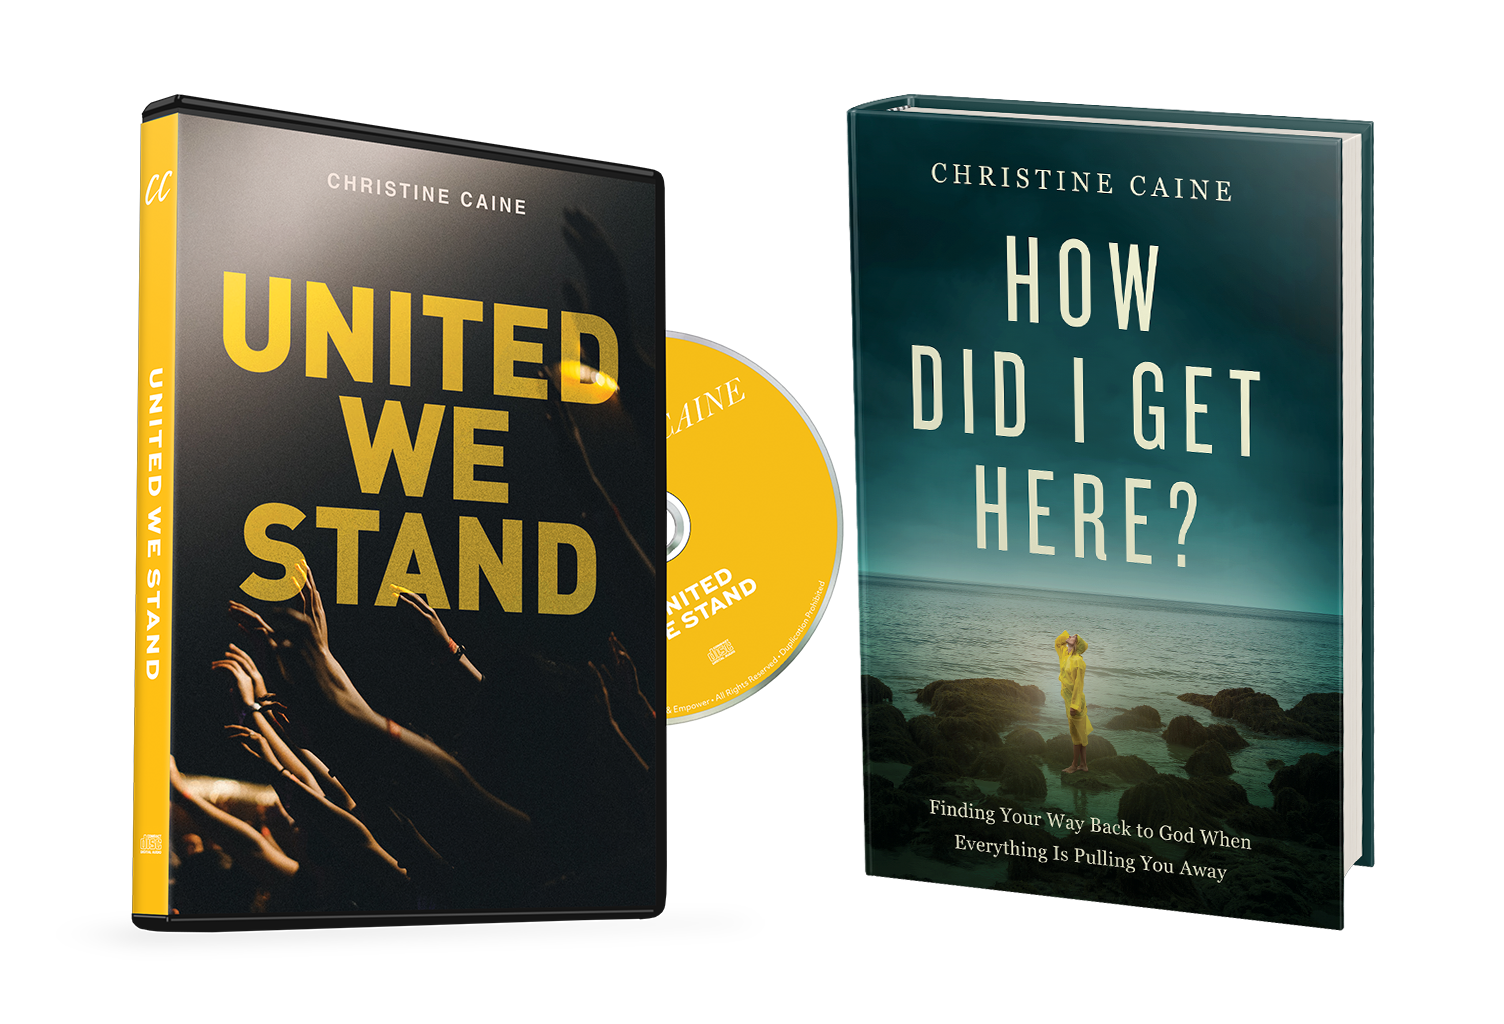 Christine Caine’s CD United We Stand and How Did I Get Here? on TBN